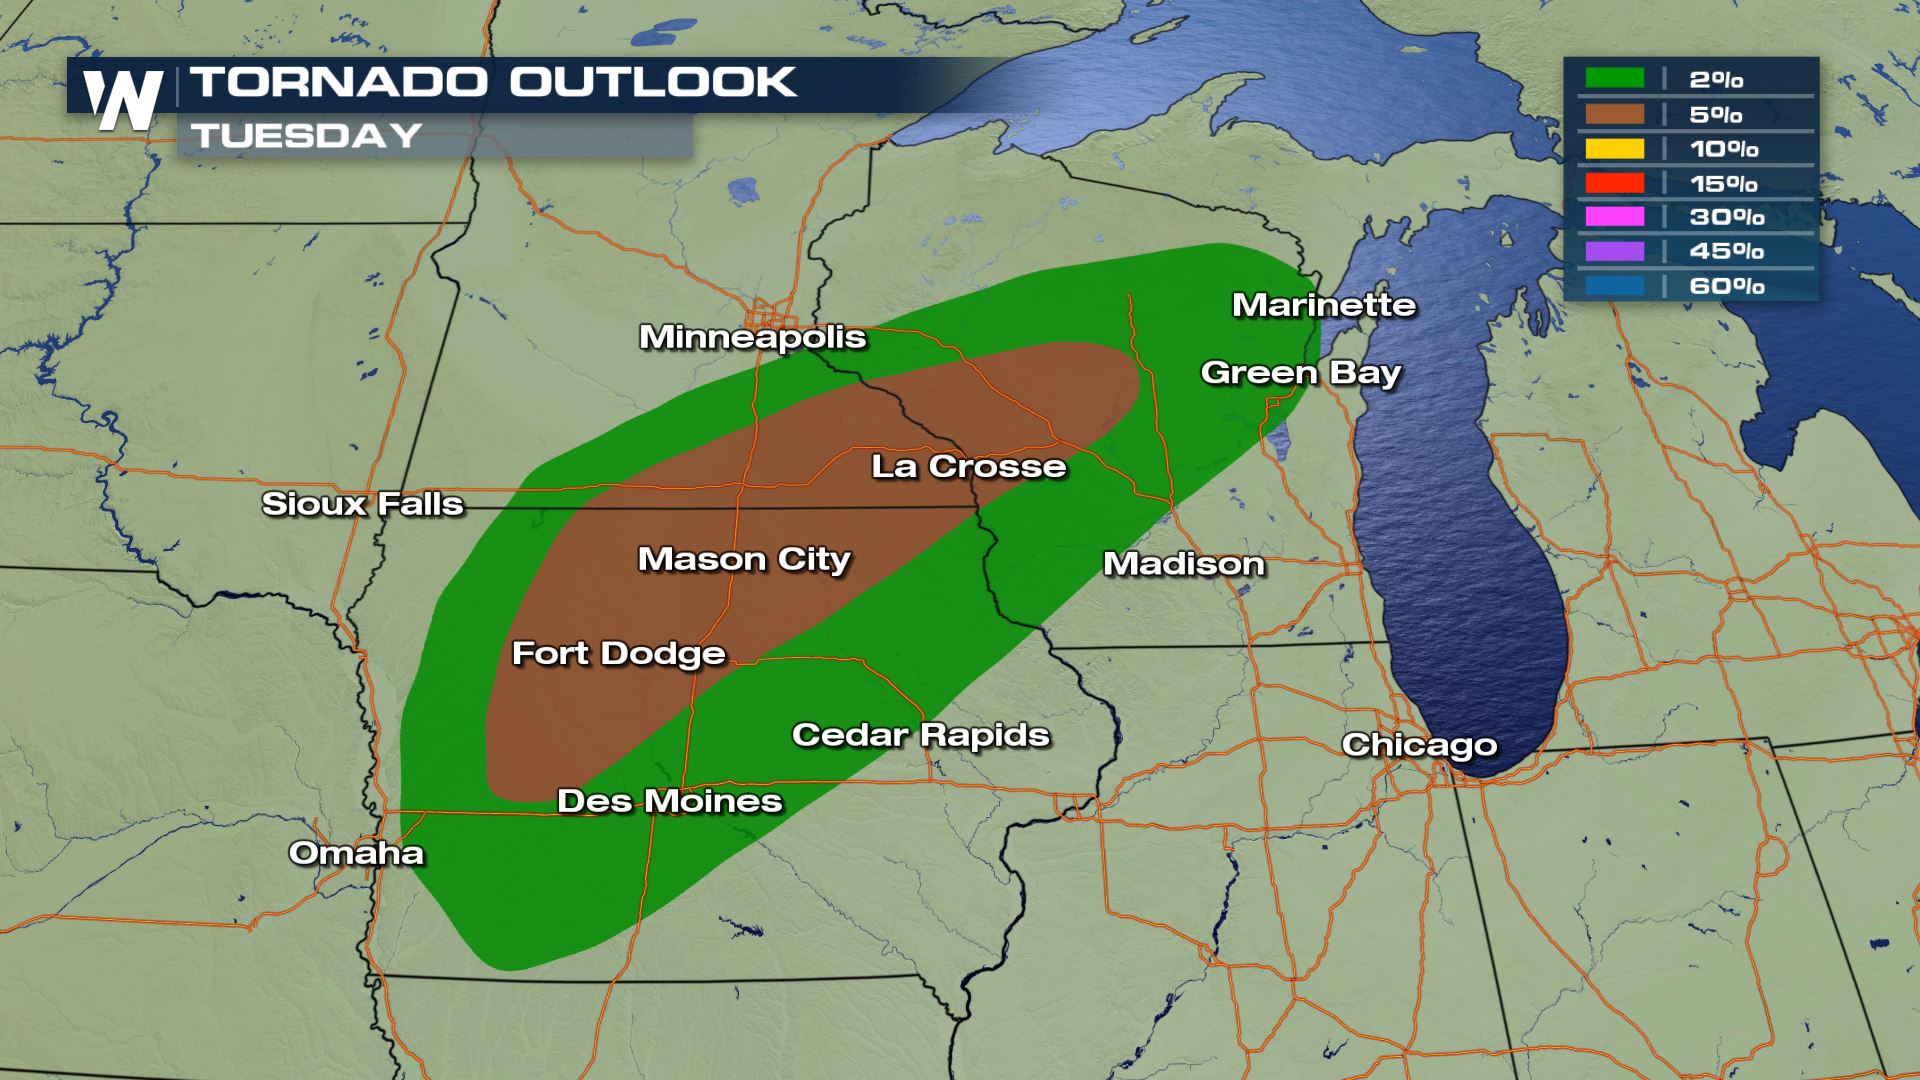 Tornadoes and Damaging Winds Possible for the Upper Midwest Tuesday